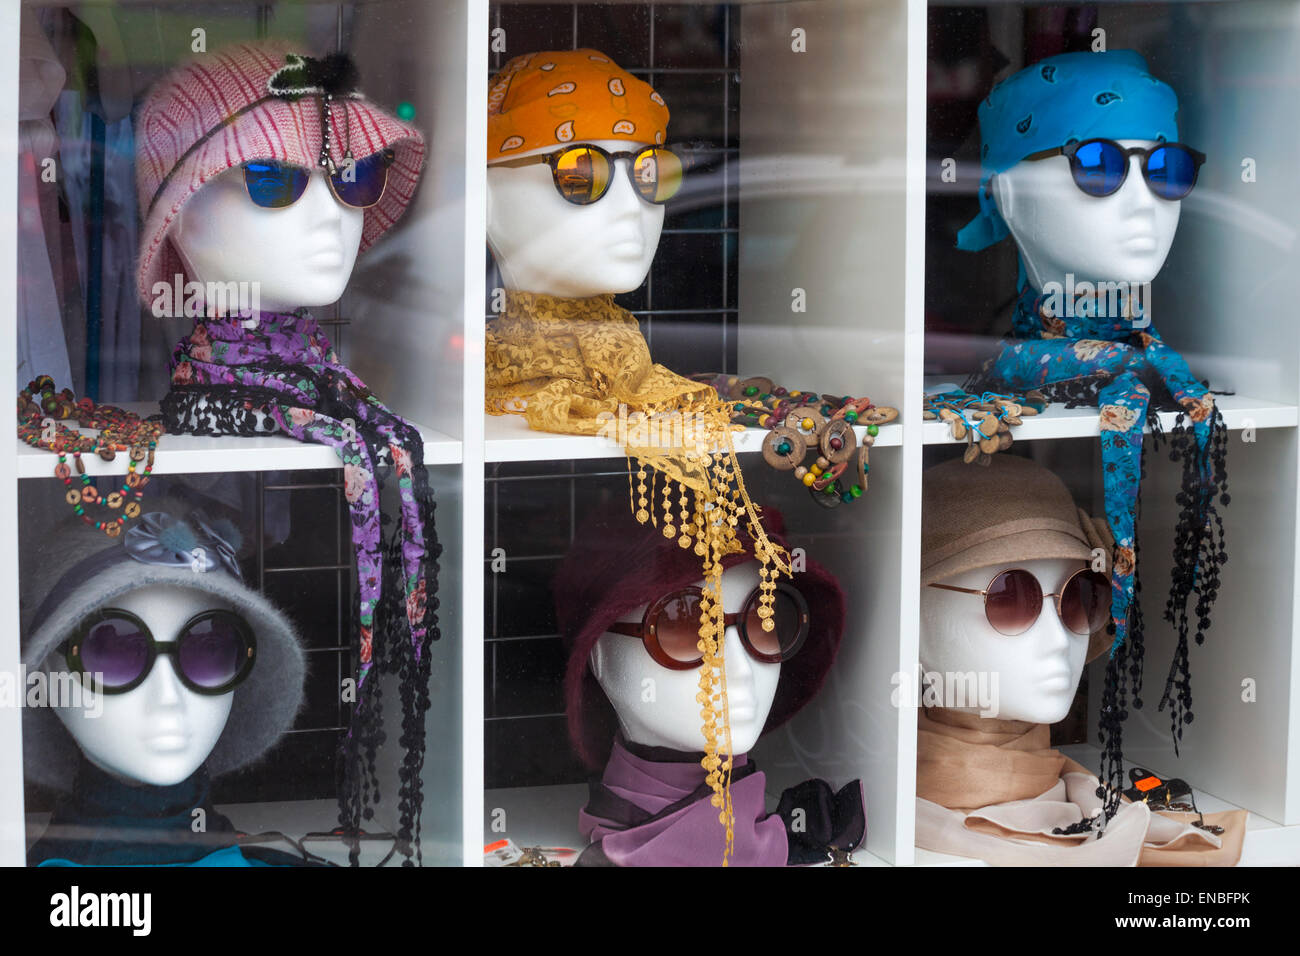 A row of identical bald mannequin heads, shoulder to shoulder, looking  upward Stock Photo - Alamy